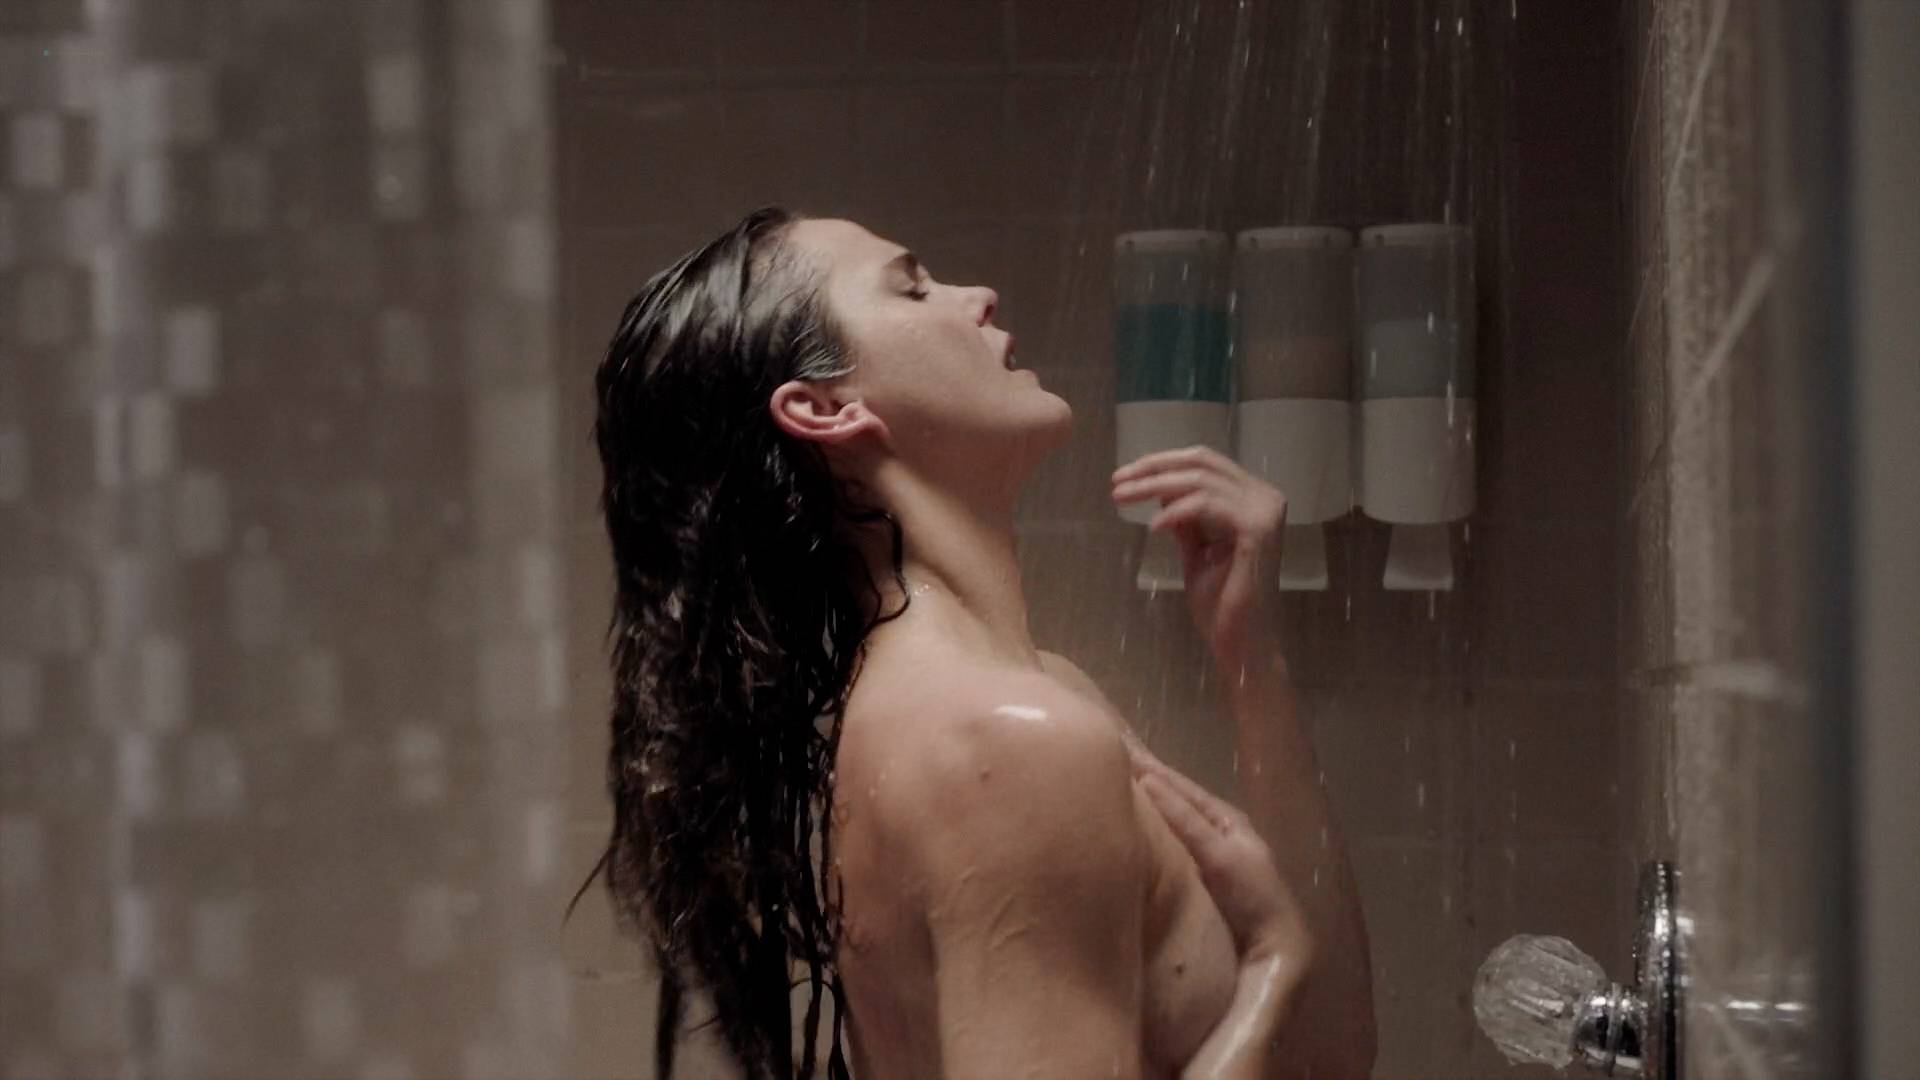 Keri-Russell-nude-butt-in-the-shower-The-Americans-2017-s5e2-HD720-1080p-00...